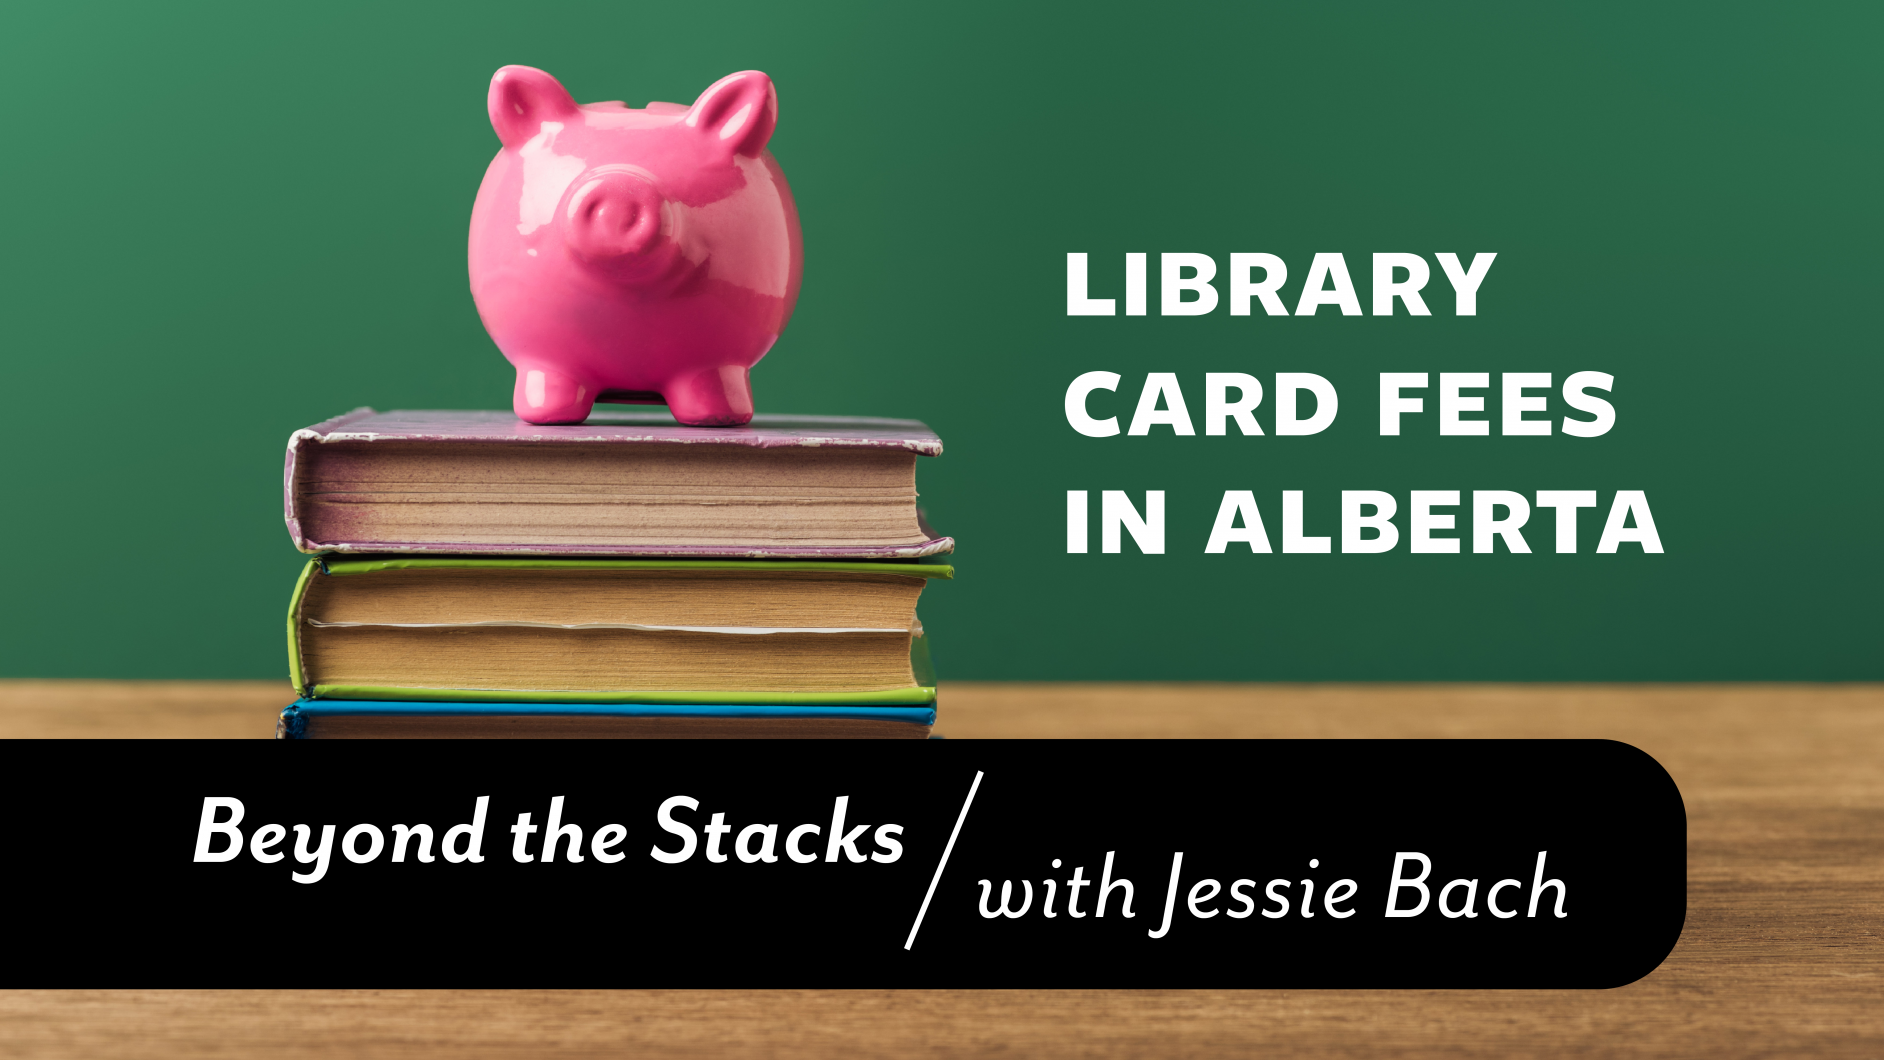 Beyond the Stacks with Jessie Bach: Library Card Fees in Alberta